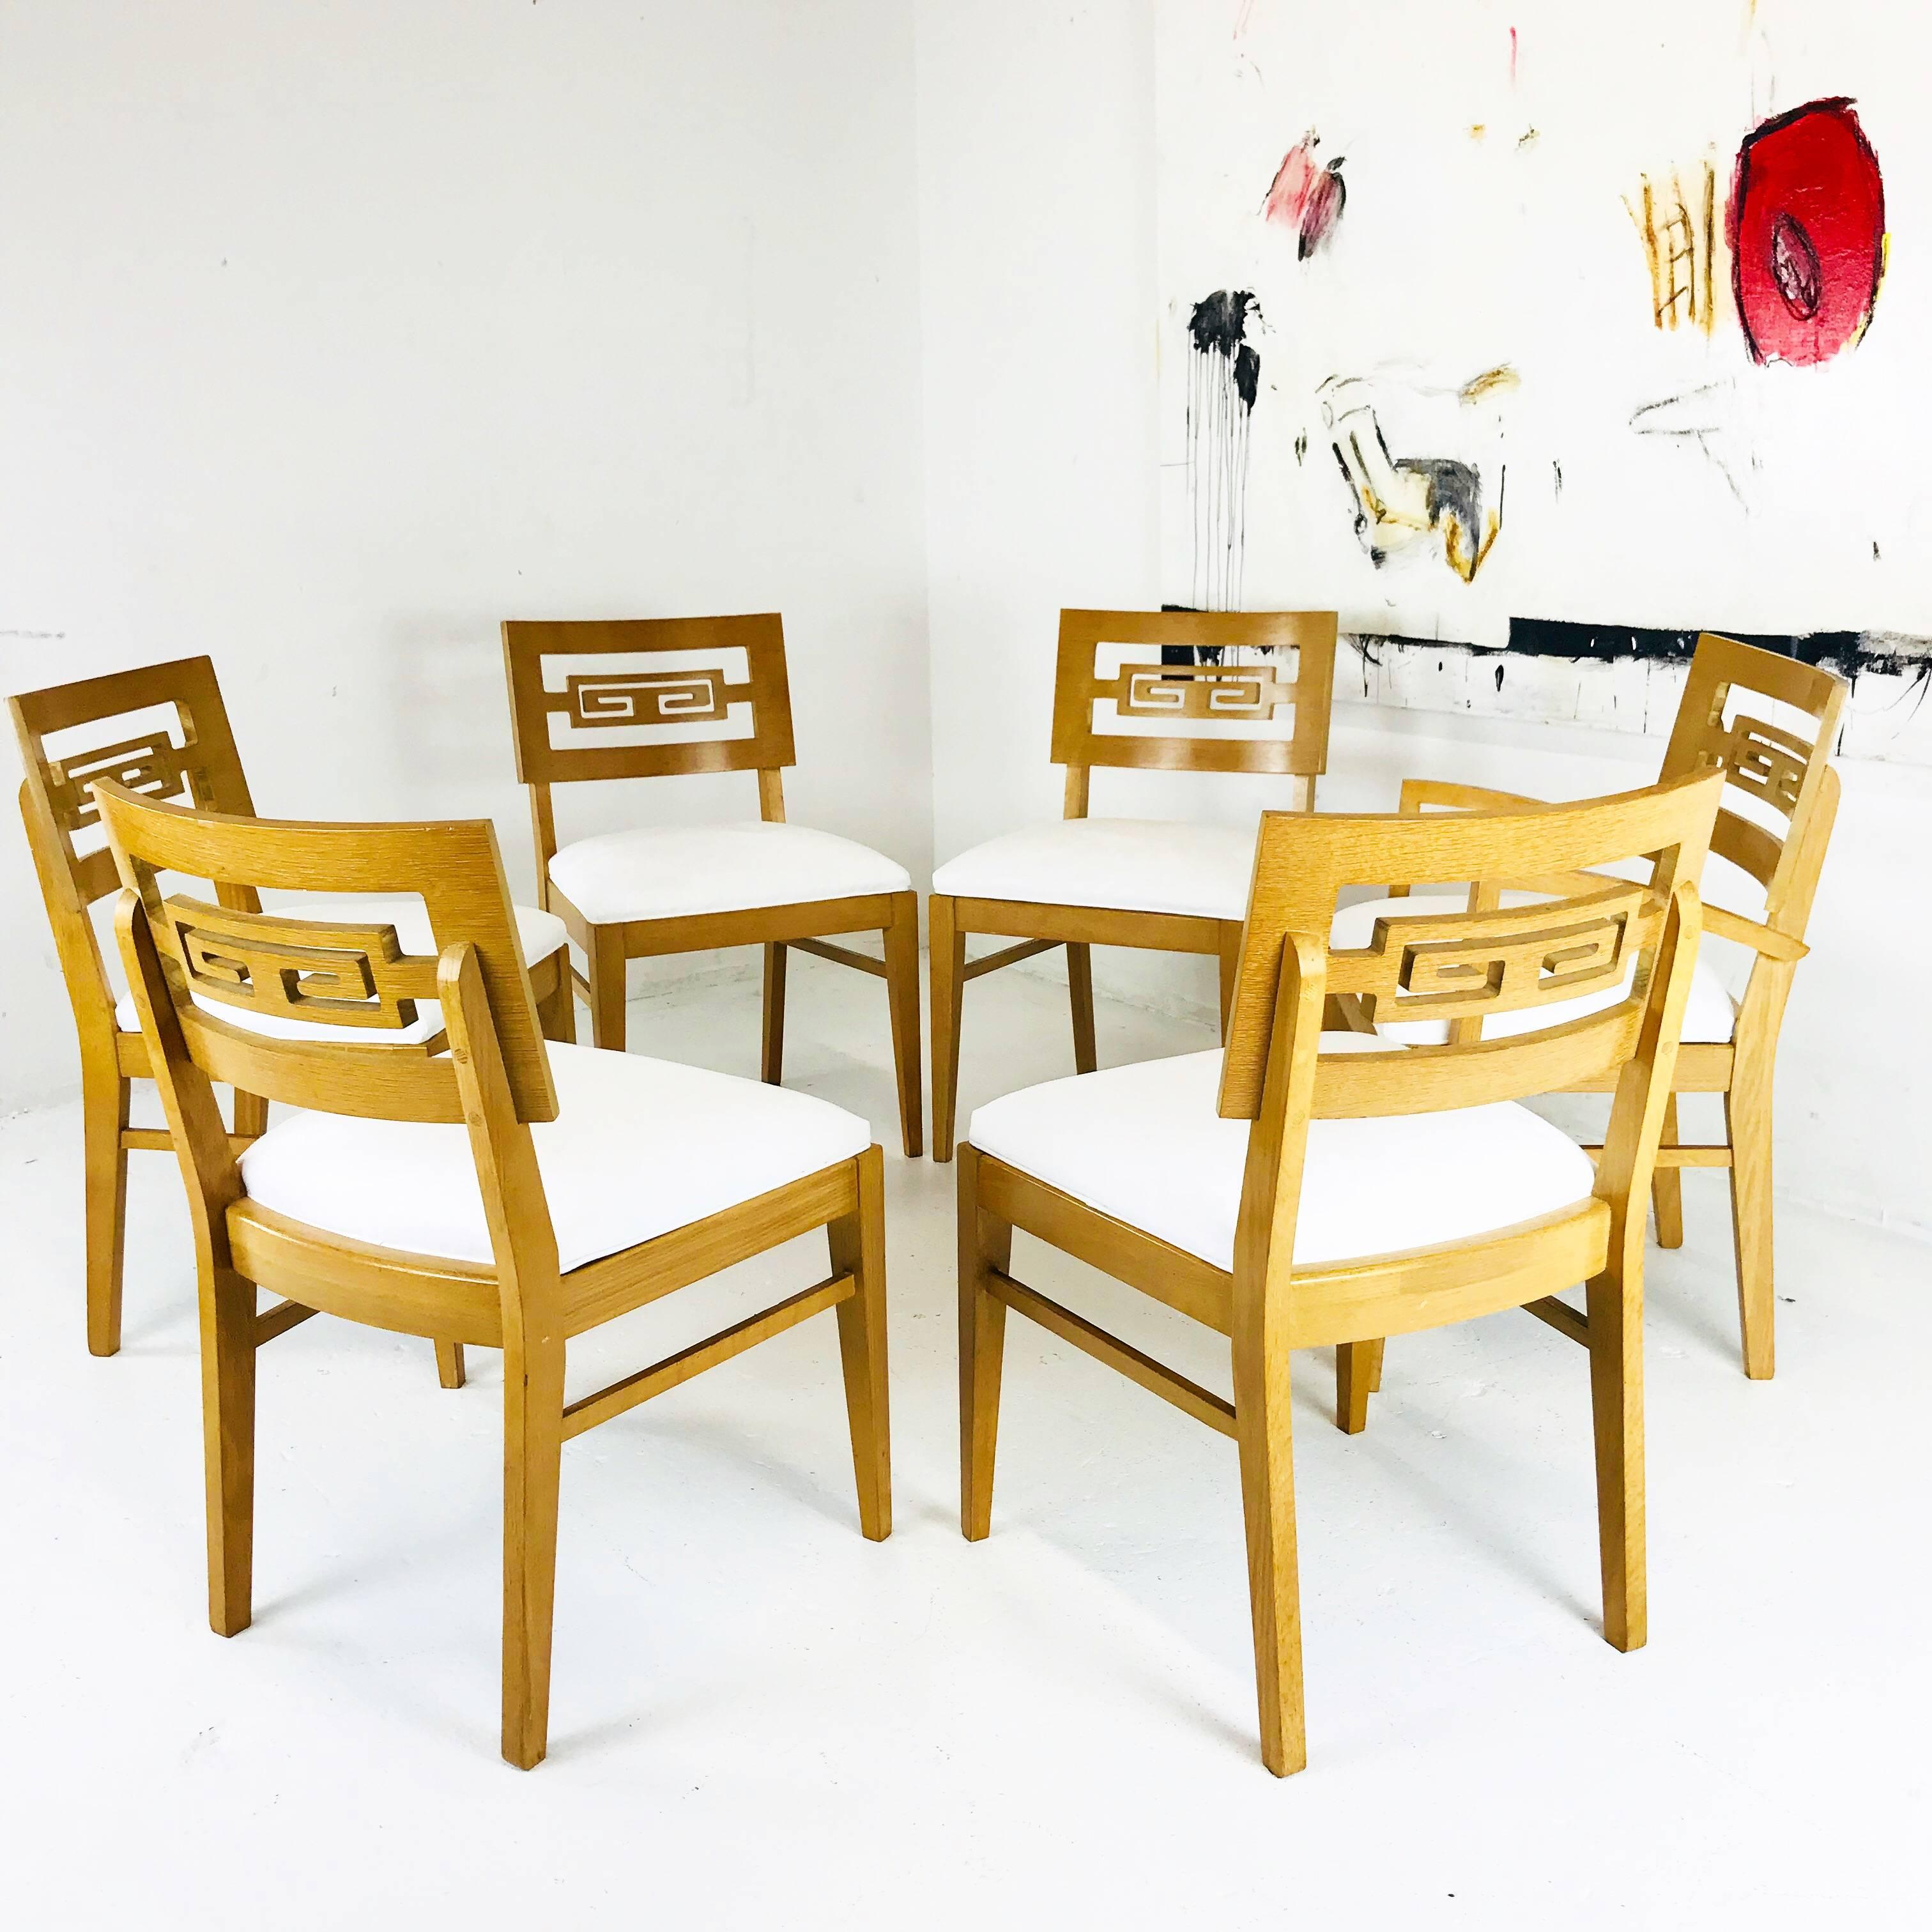 Set of six Greek key dining chairs. There are five side chairs and one armchair. Seat cushions were recently upholstered. Wood finish is in good vintage condition with signs of wear due to age and use, circa 1960s

Dimensions:
22.5